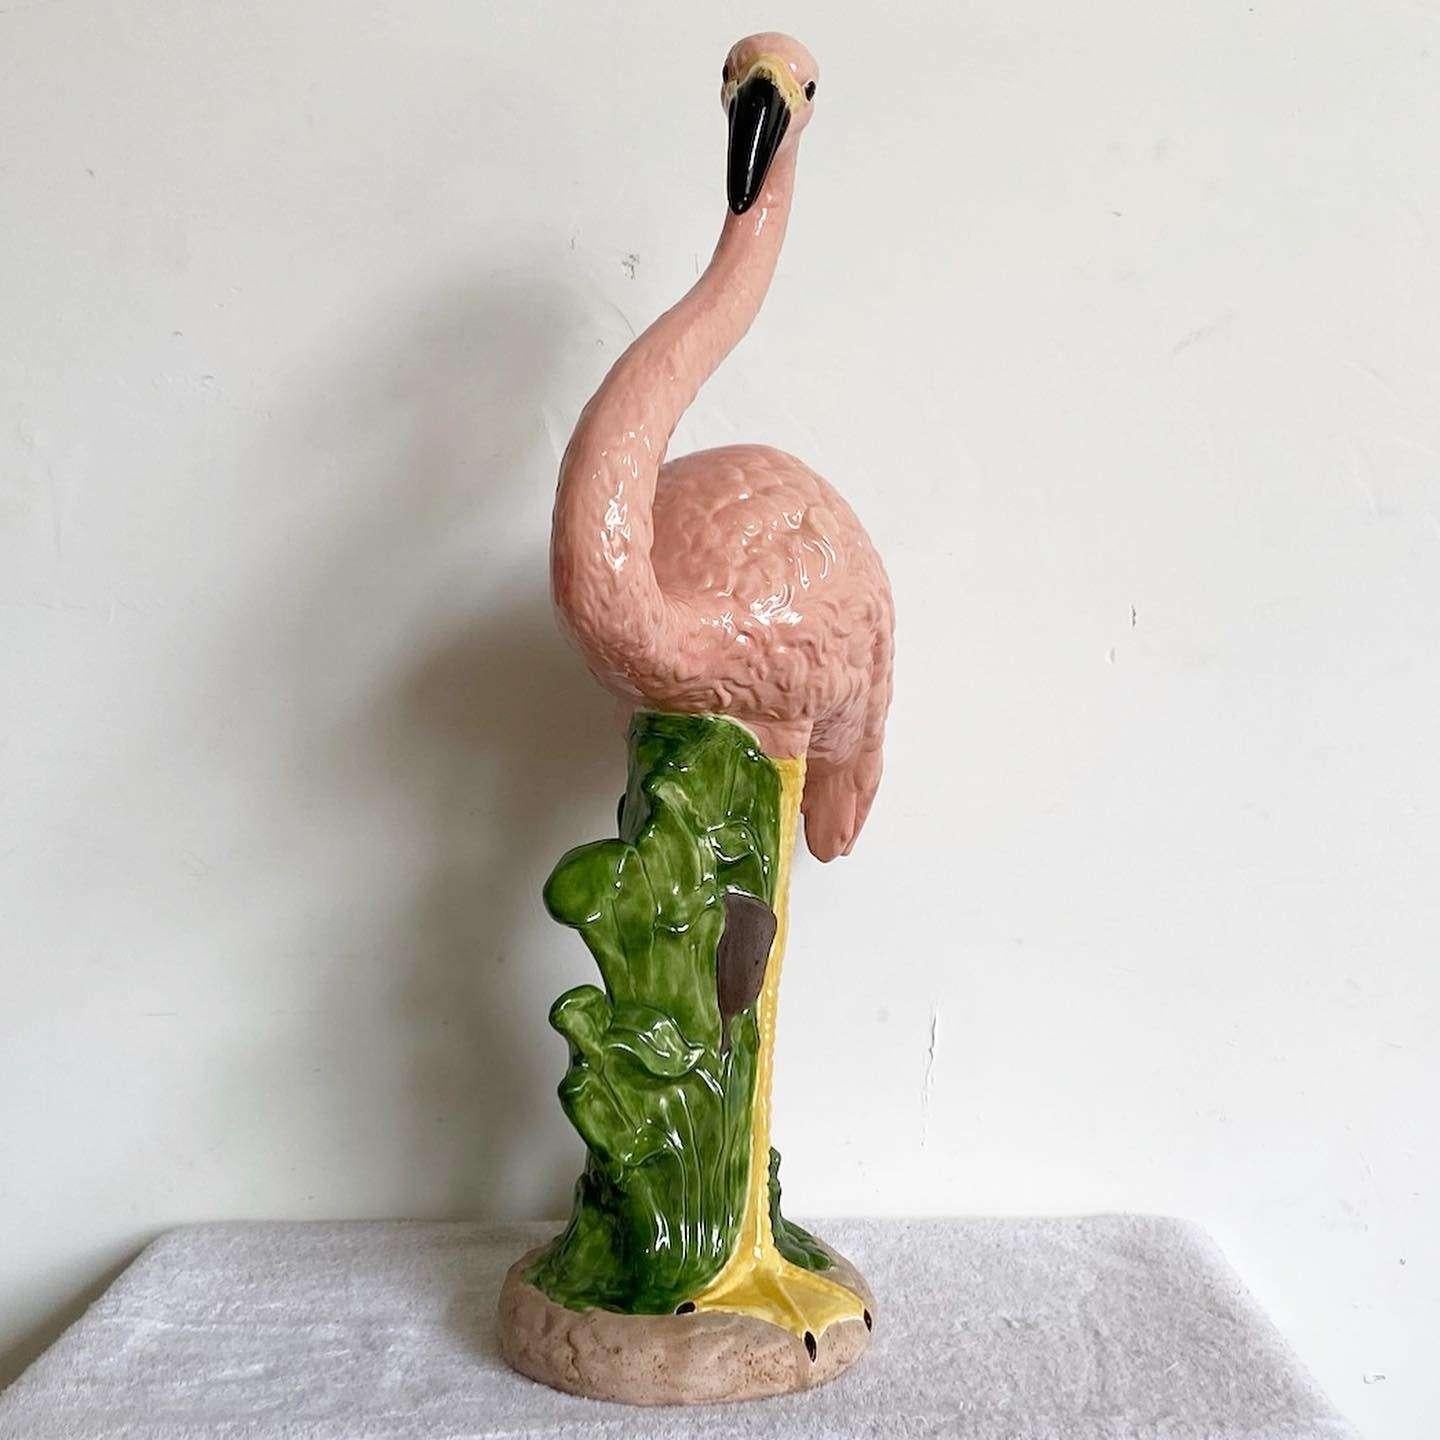 Exceptional vintage ceramic flamingo sculpture. Hand painted pink and green, it is almost life size.

